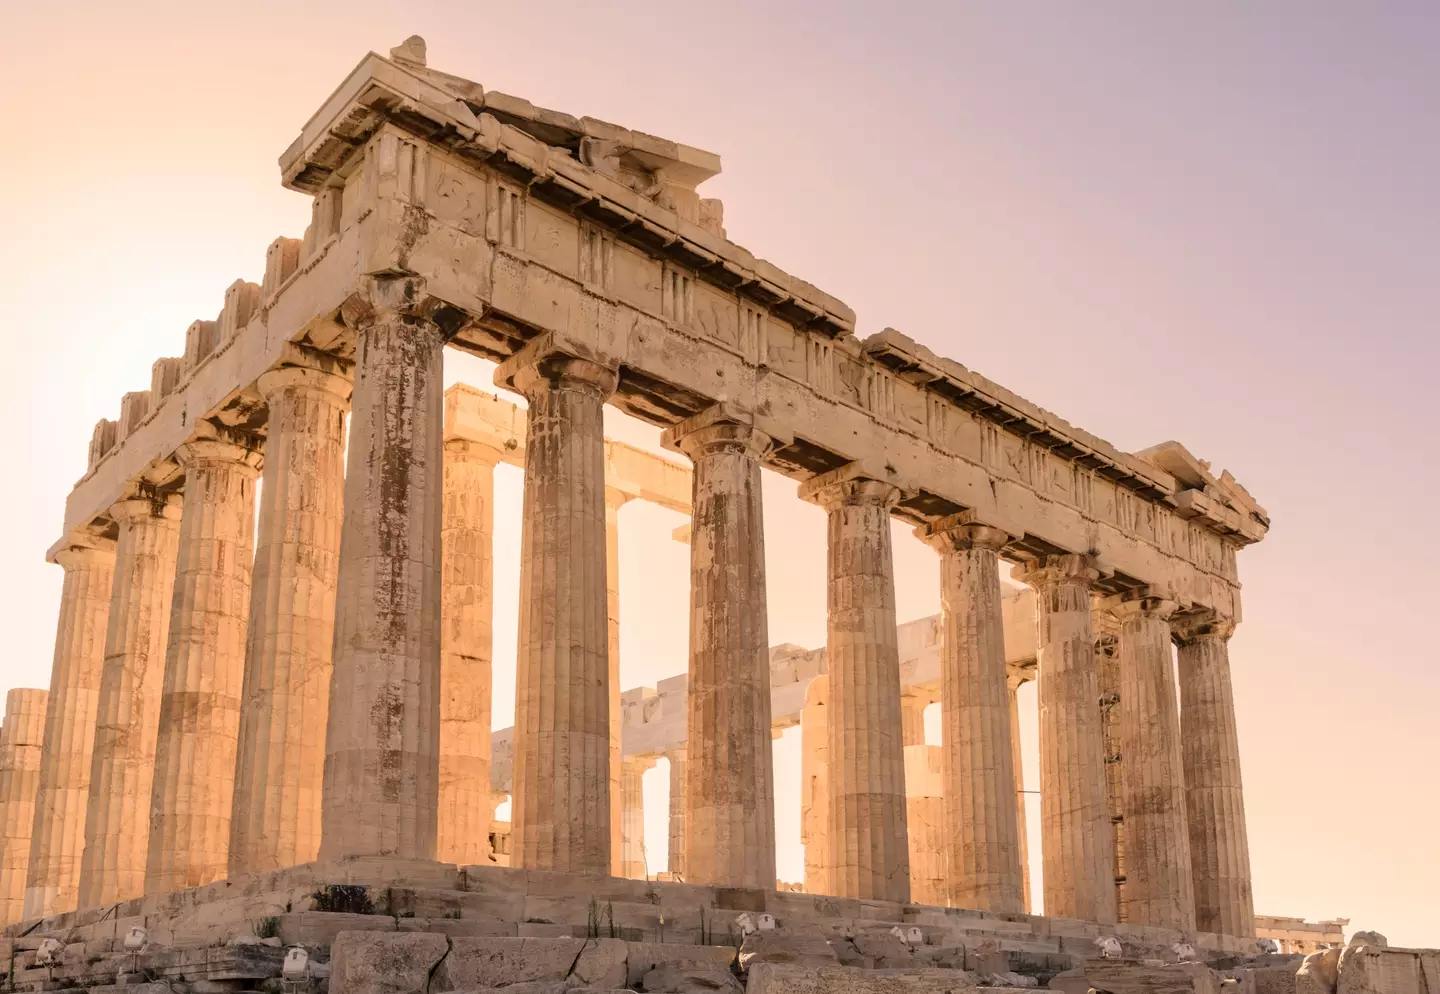 The Parthenon in all its glory.